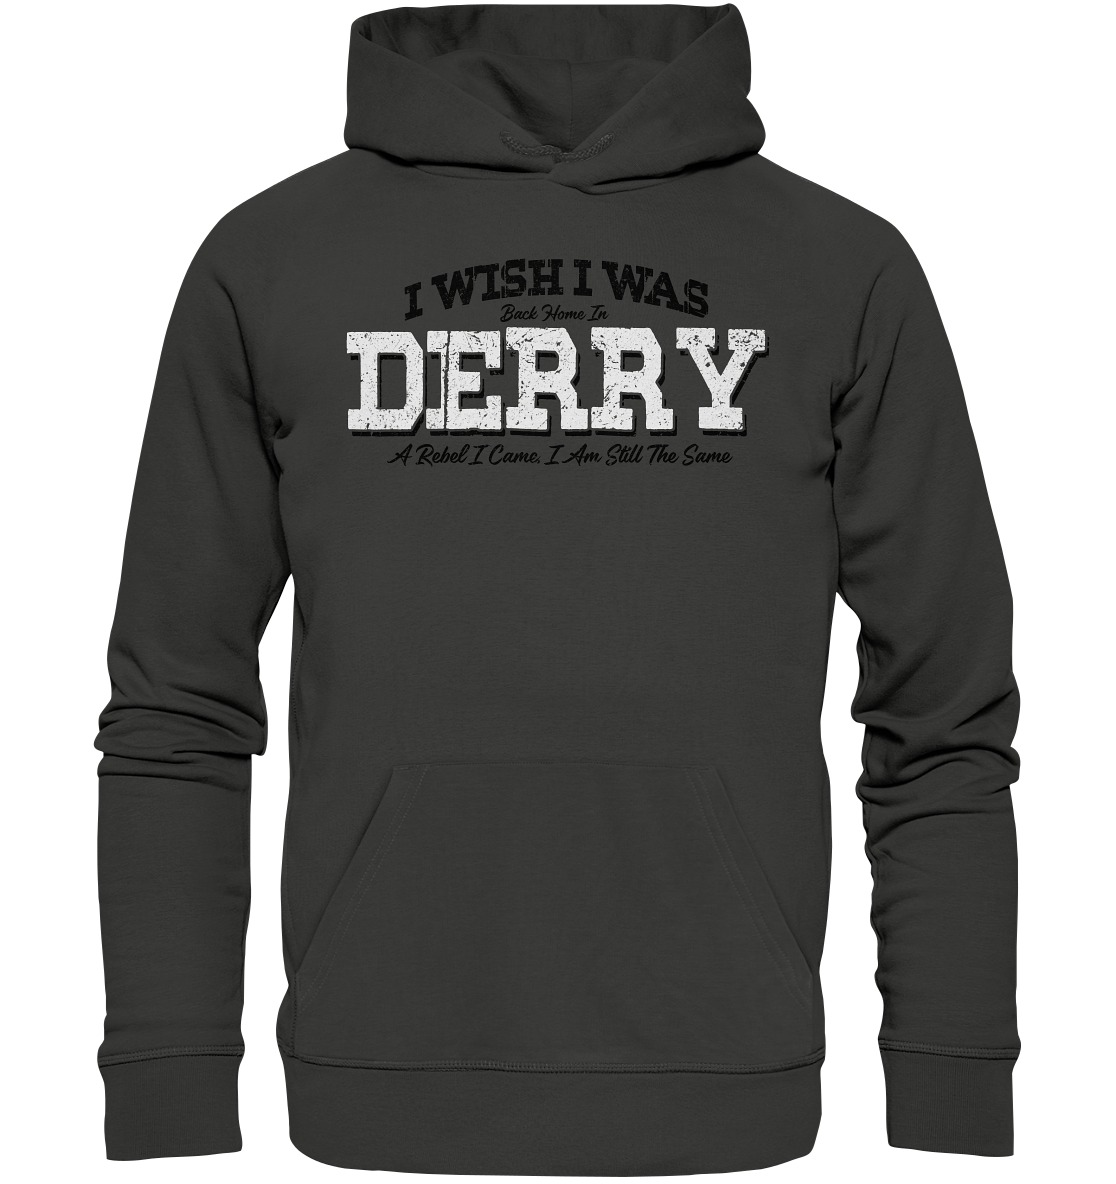 I Wish I Was Back Home In Derry - Premium Unisex Hoodie